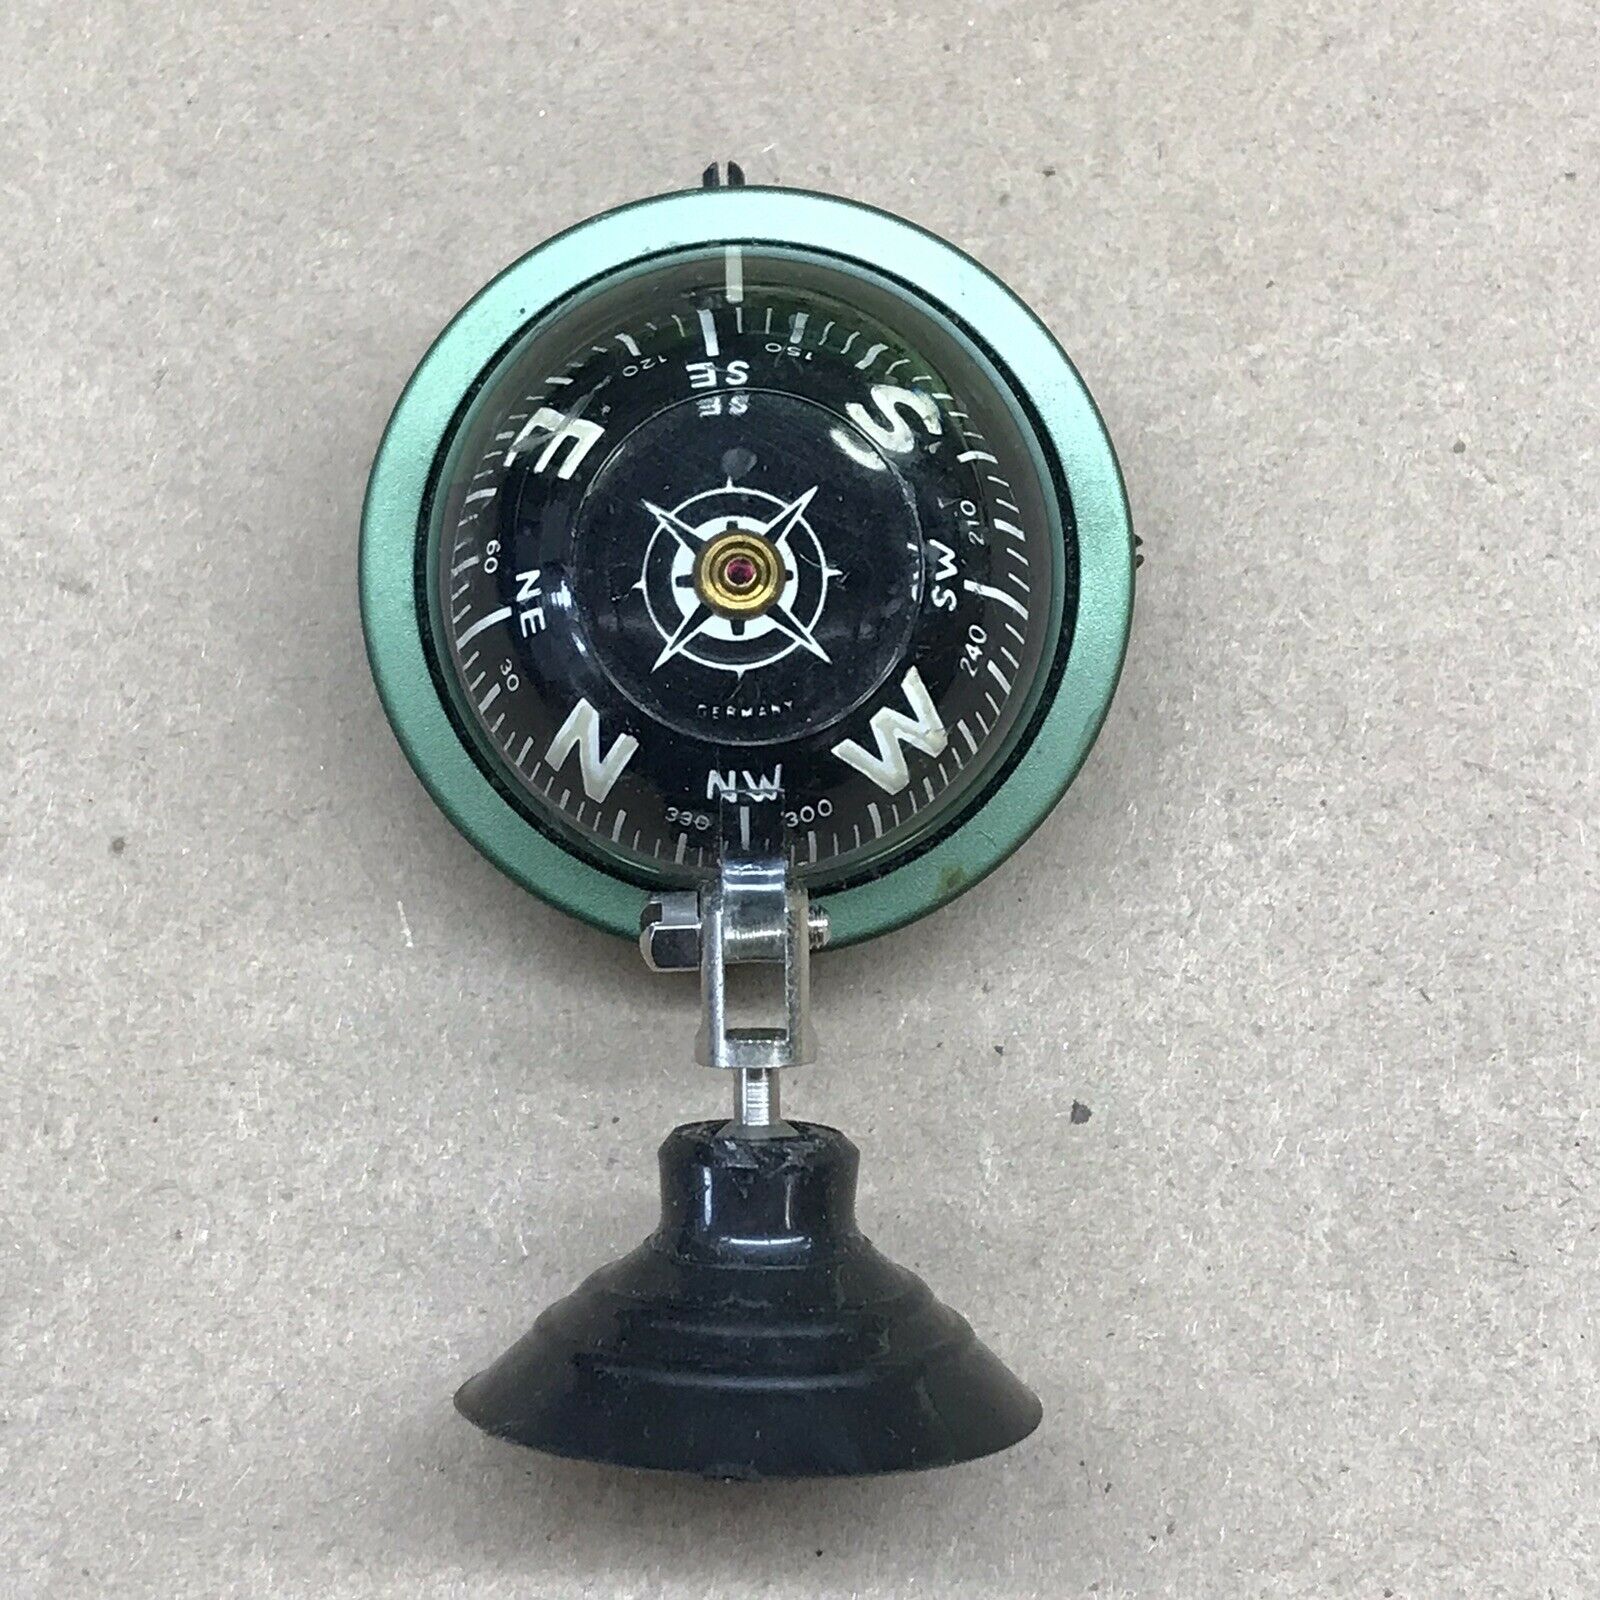 Vintage Boat Car Automobile Compass Made In Germany